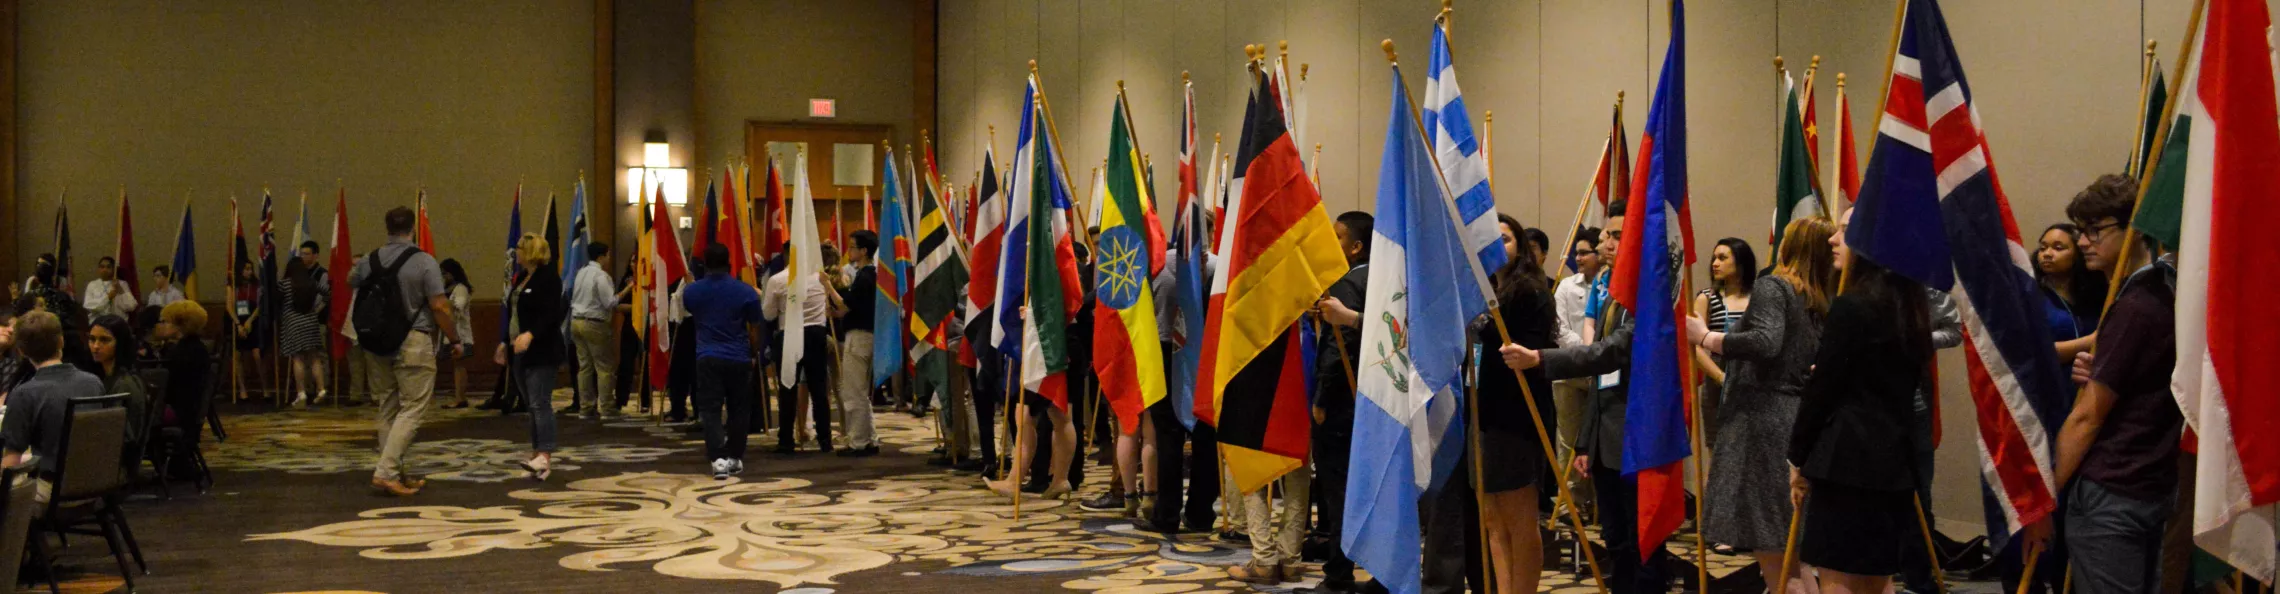 Long line of teens holding flags from around the world